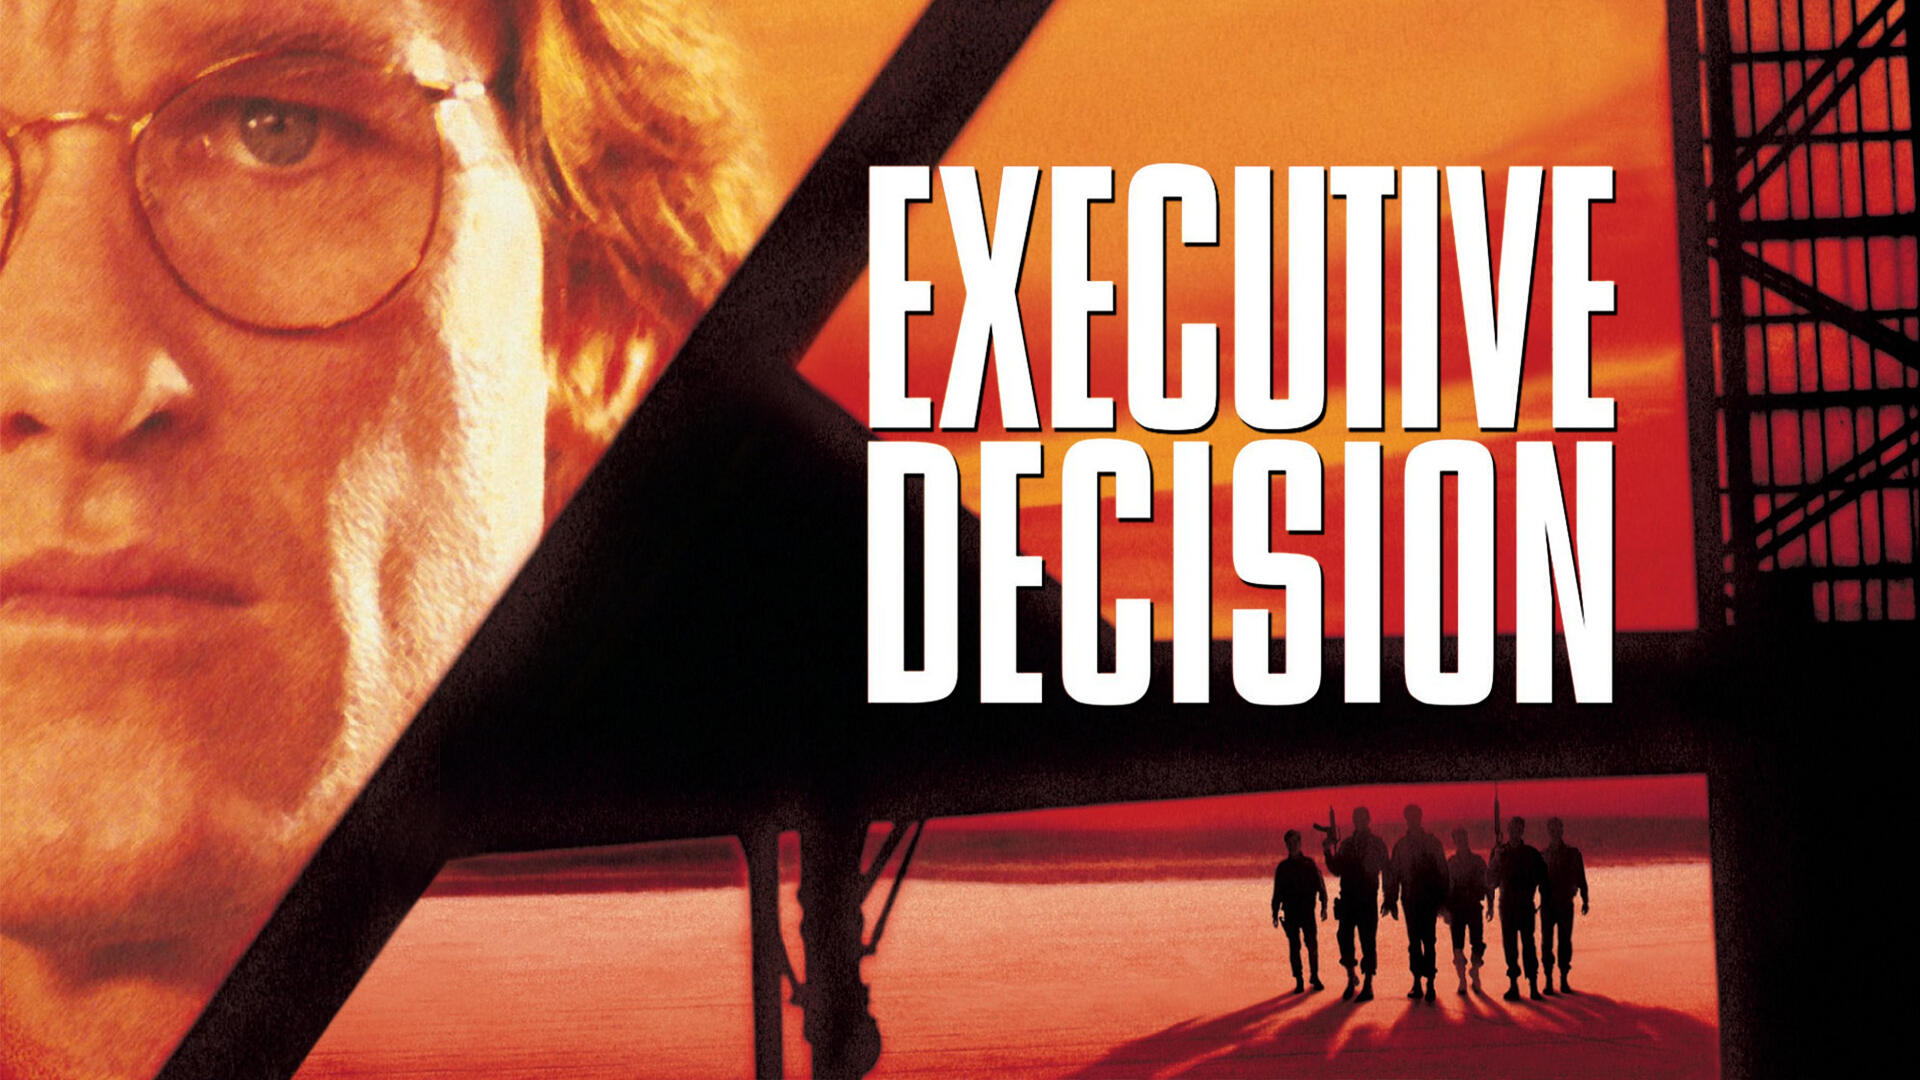 49-facts-about-the-movie-executive-decision